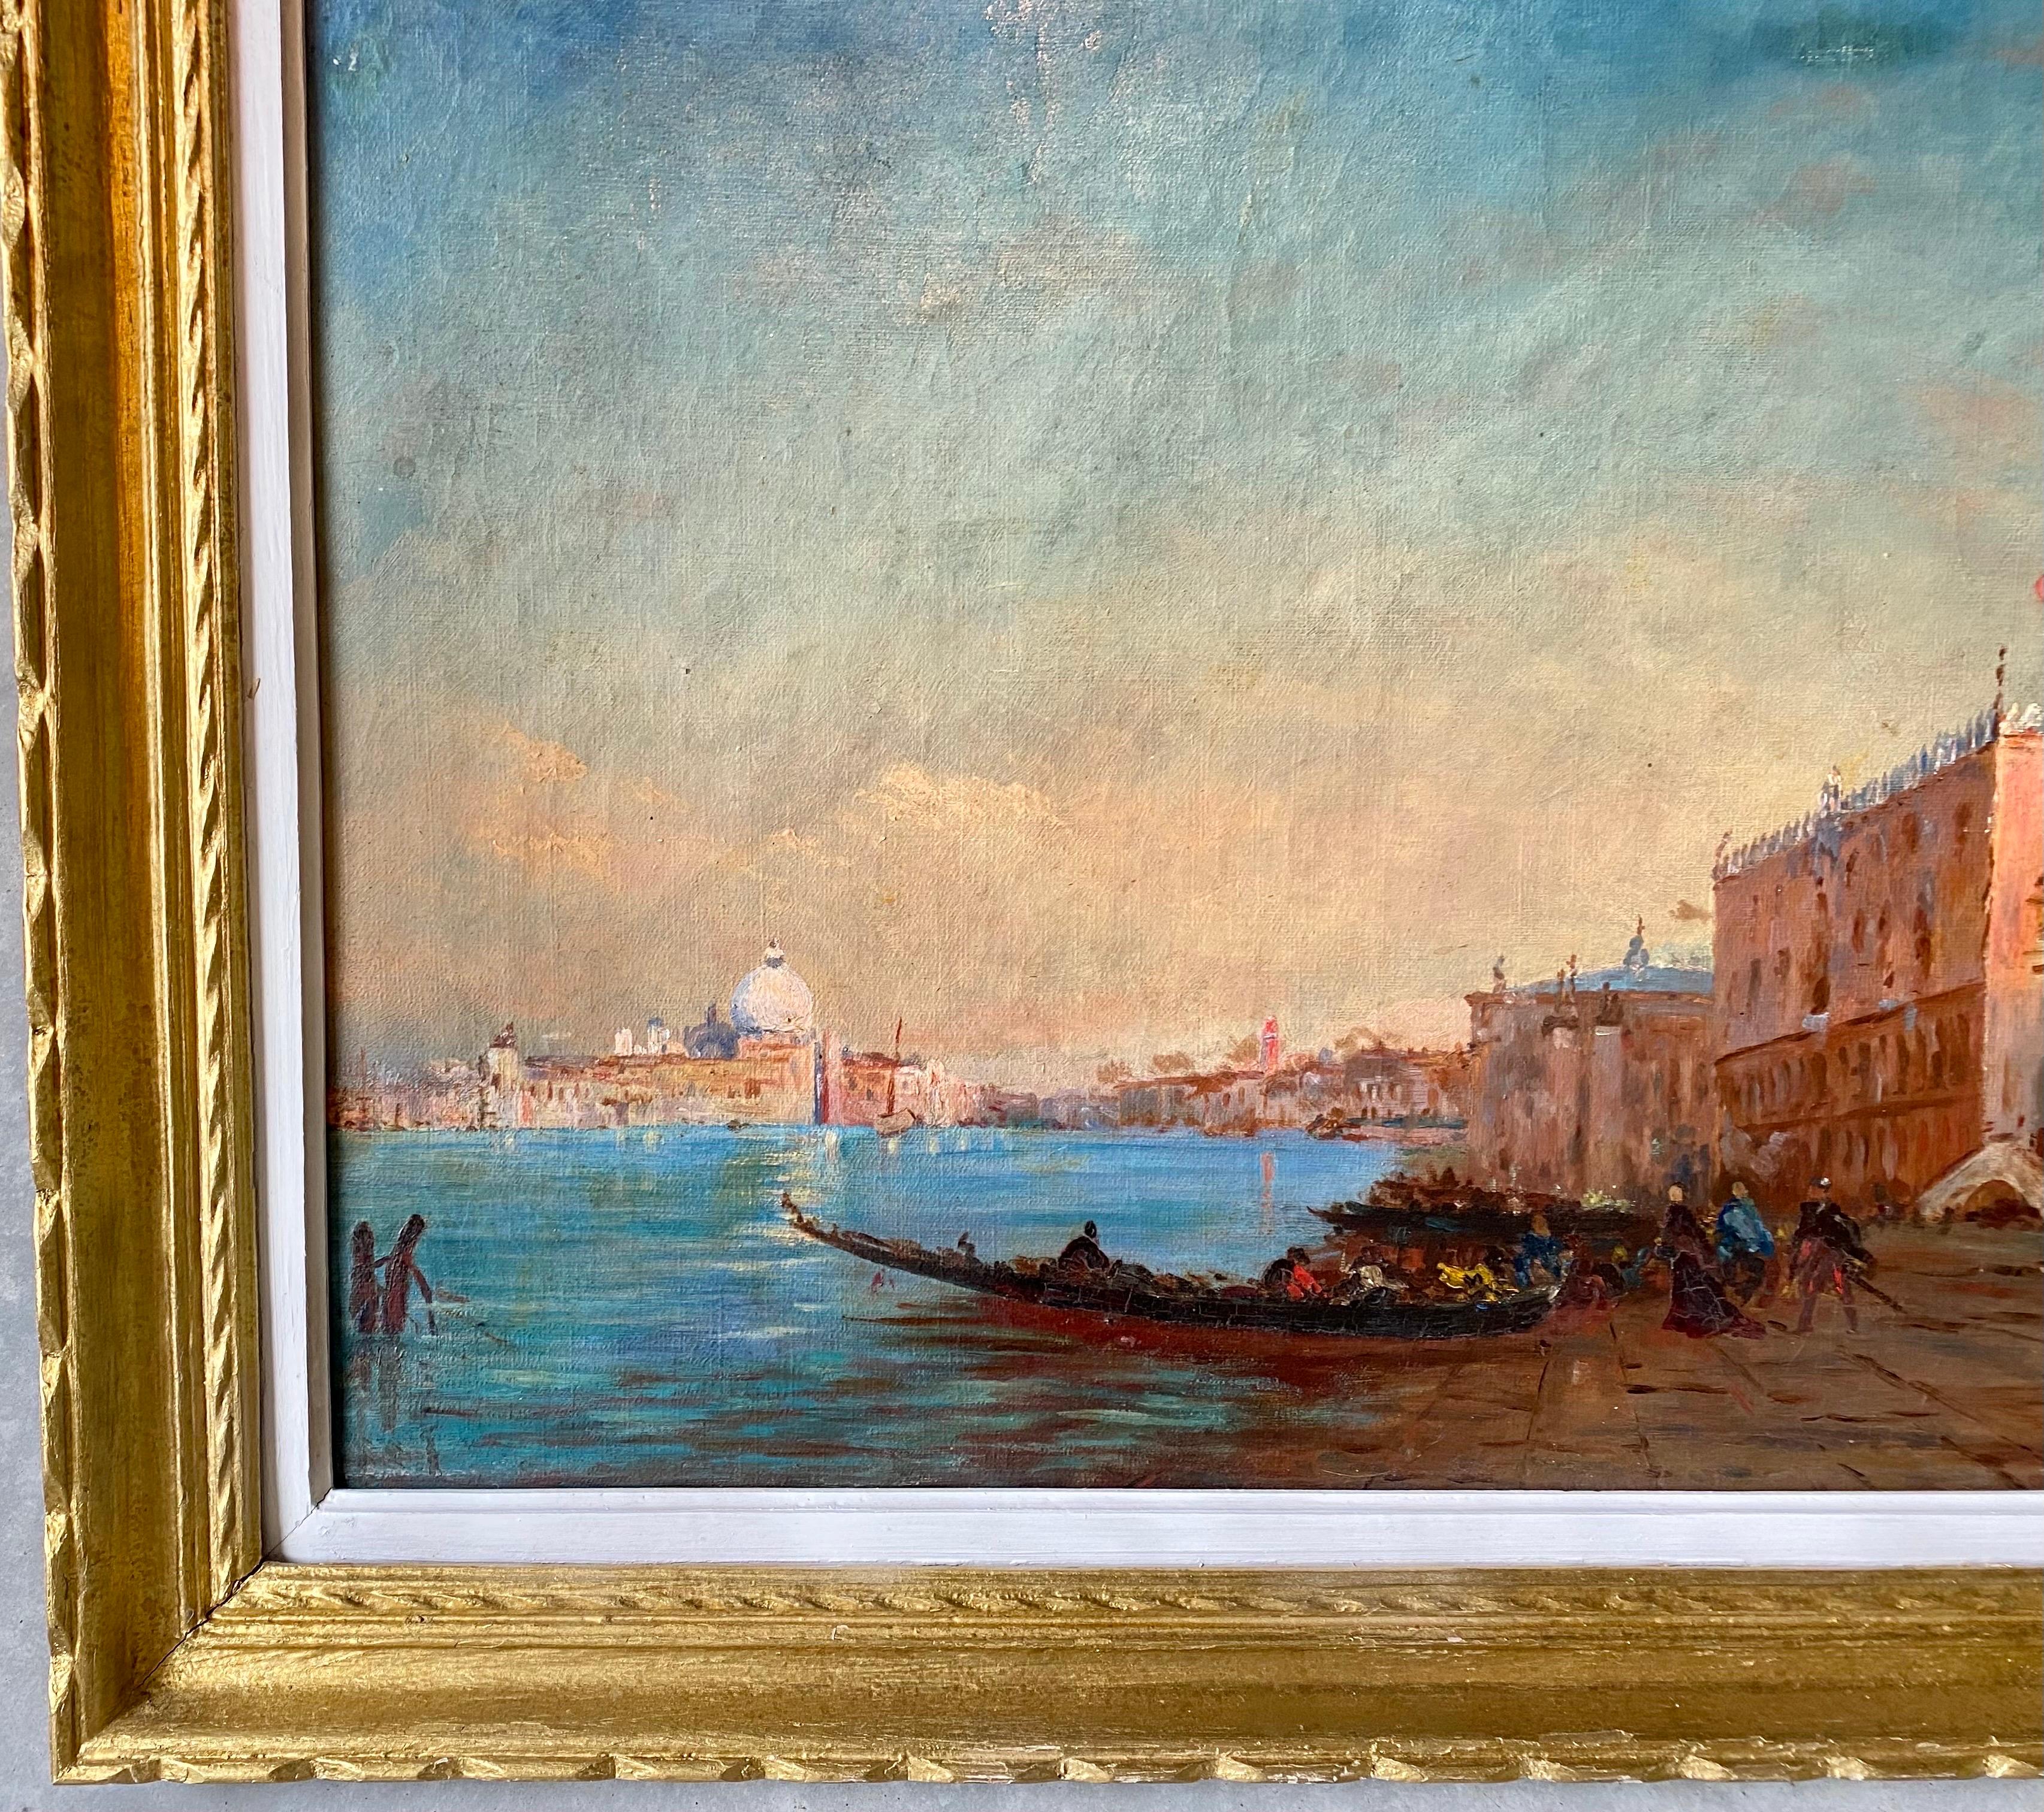 19th century French impressionist painting - Cityscape of Venice by sunset - Brown Landscape Painting by Felix Ziem